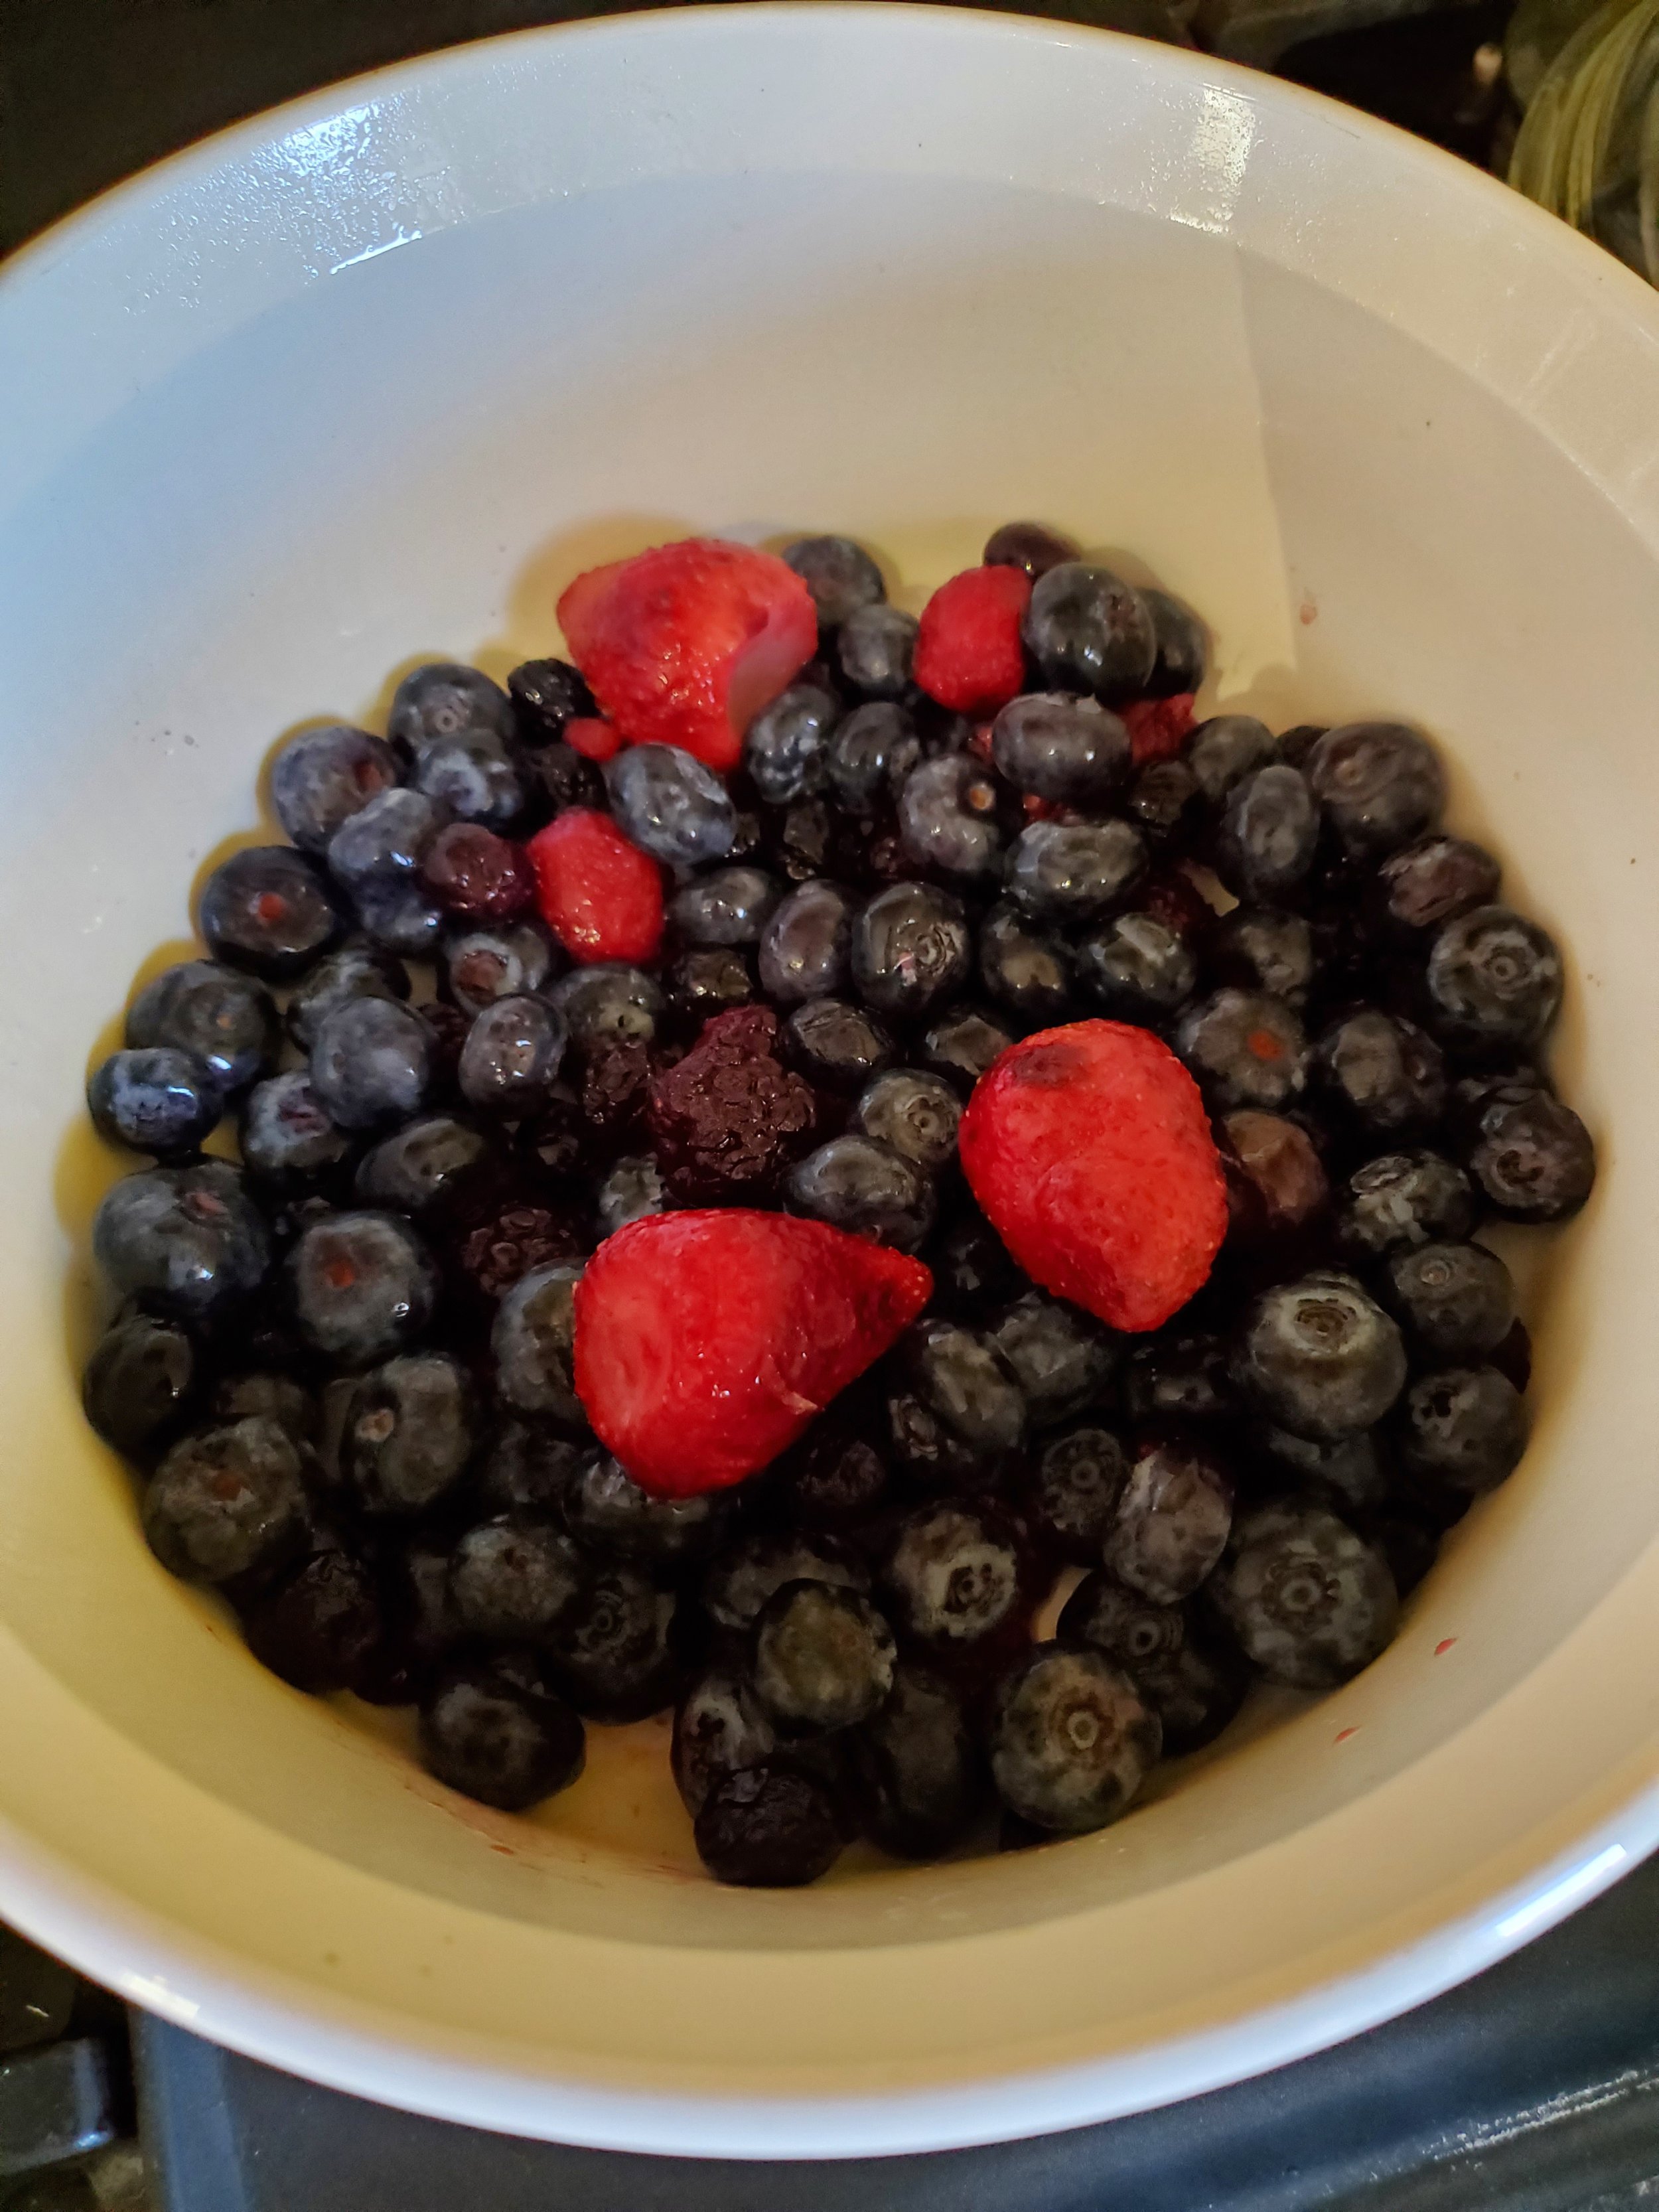 Delicious mixed berries